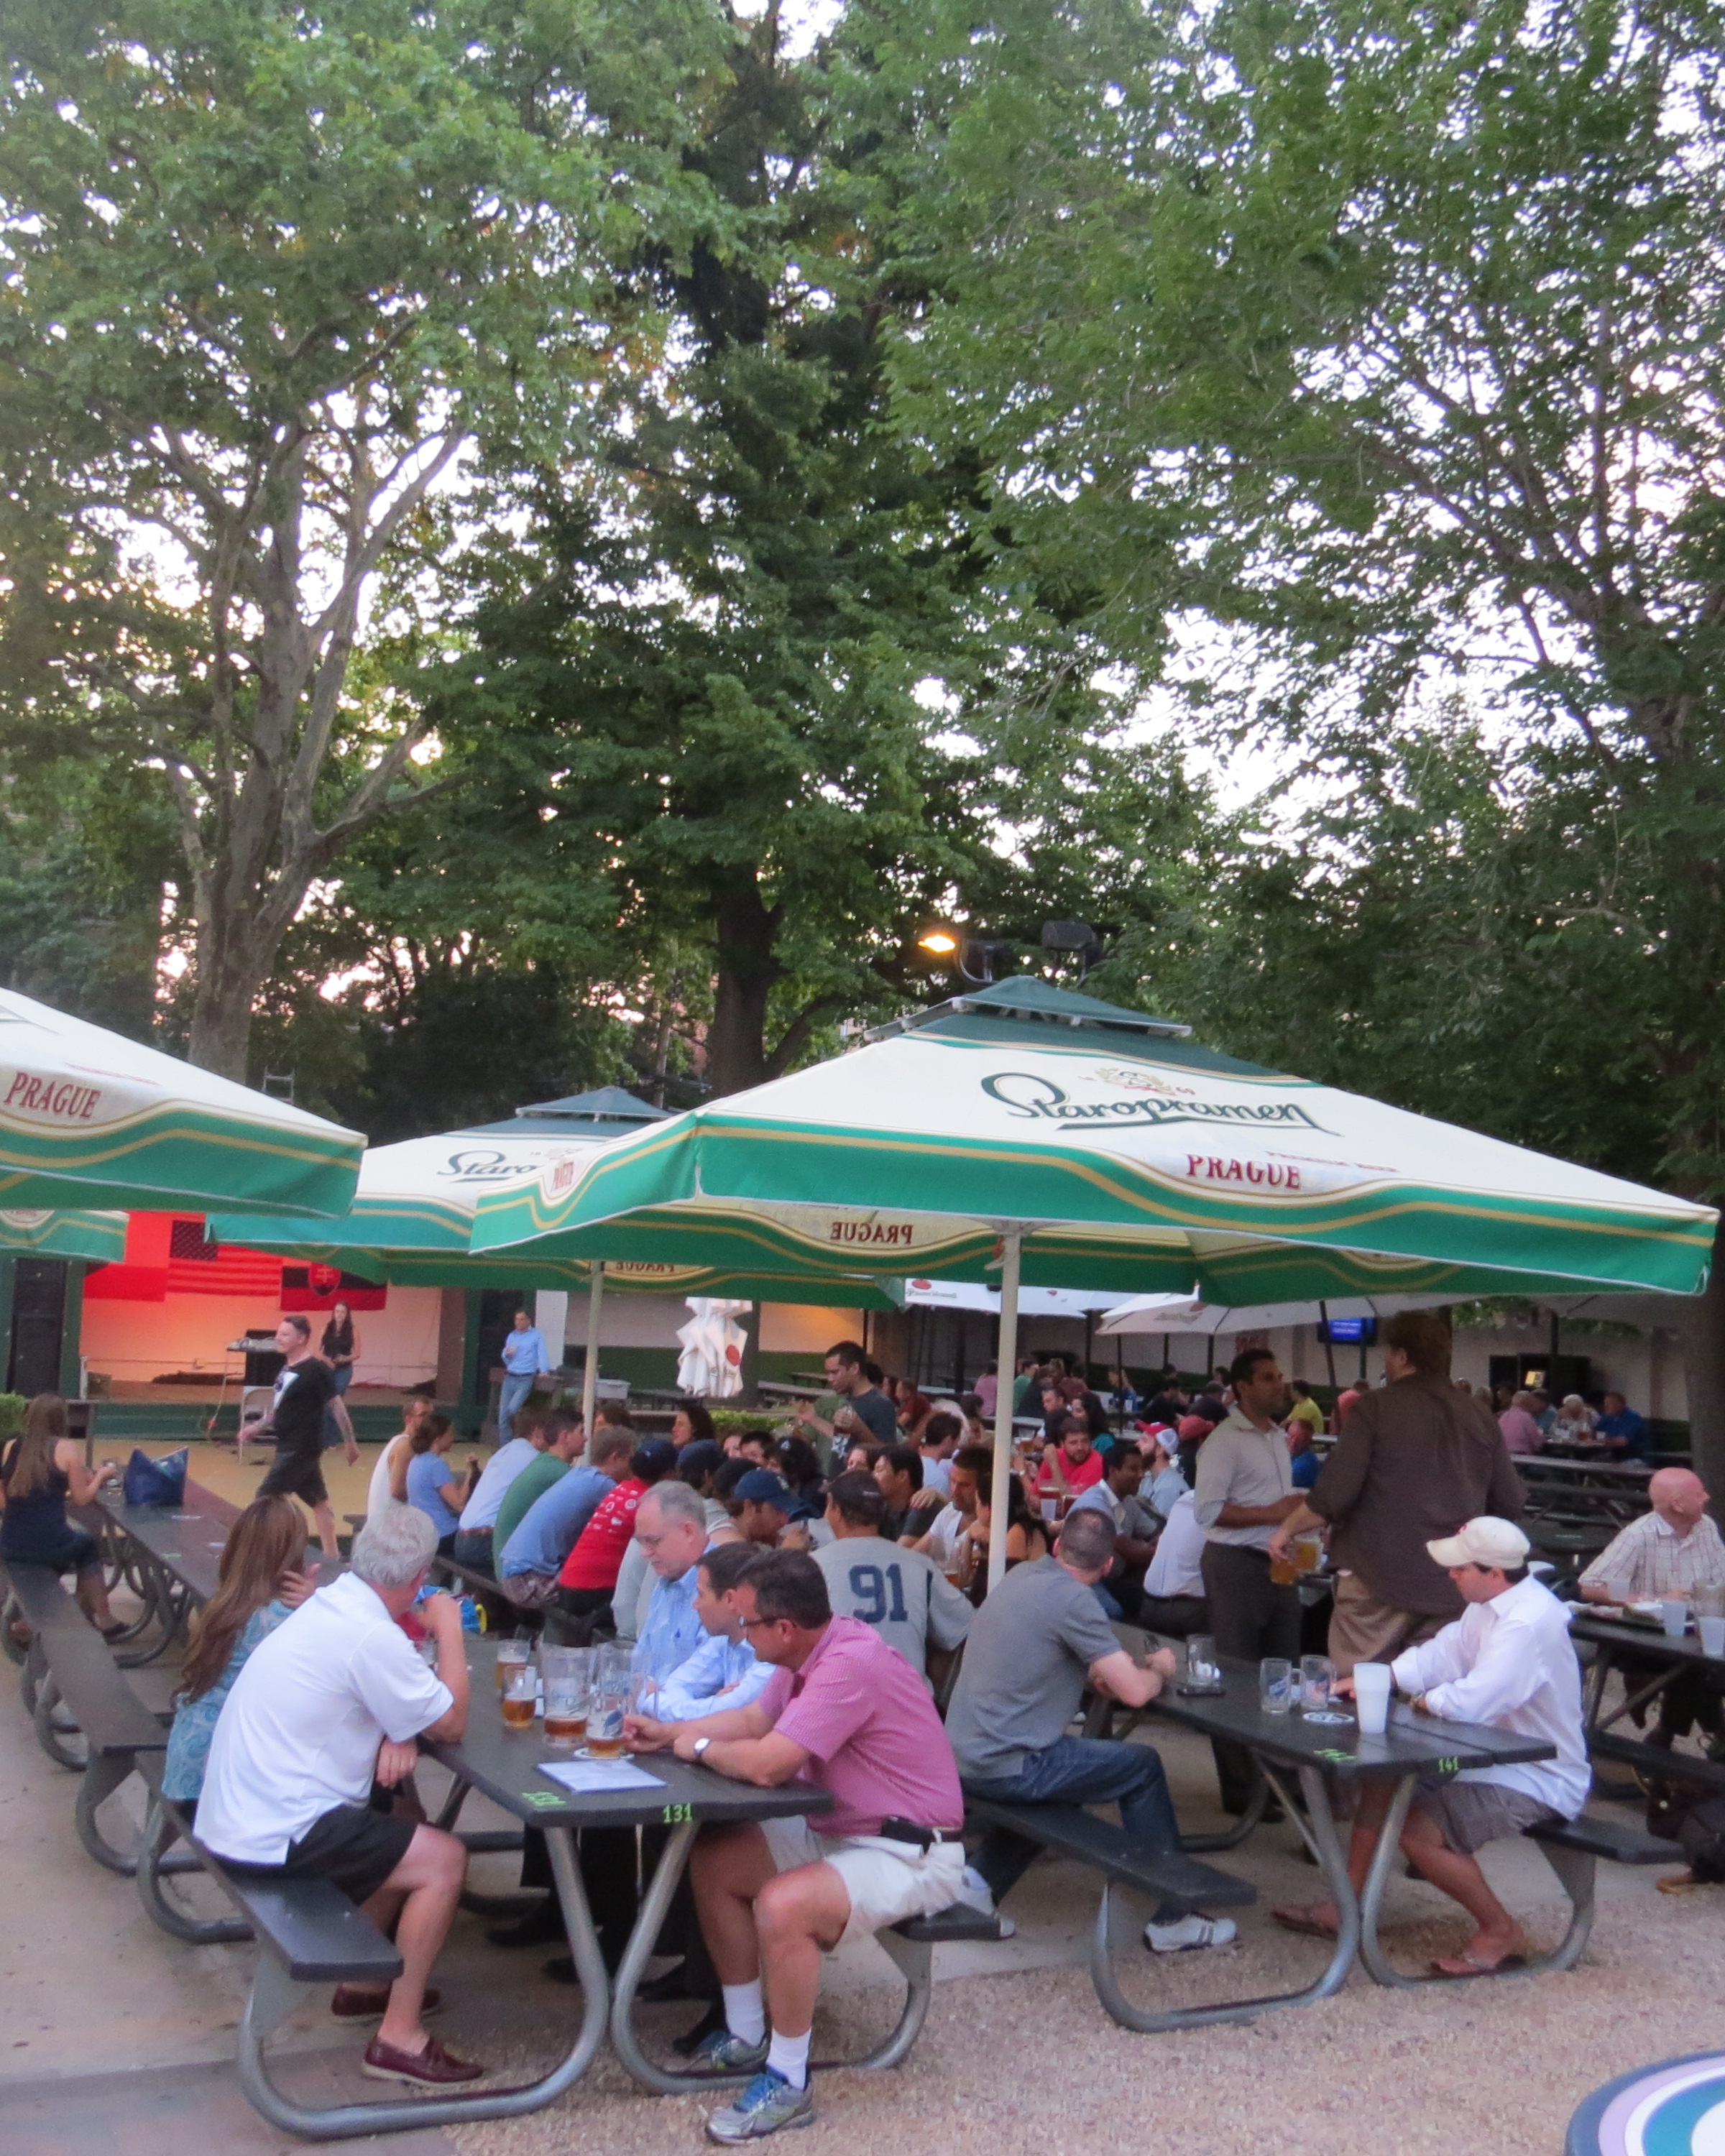 Bohemian Hall Beer Garden Serves Up Family Fun This Summer With